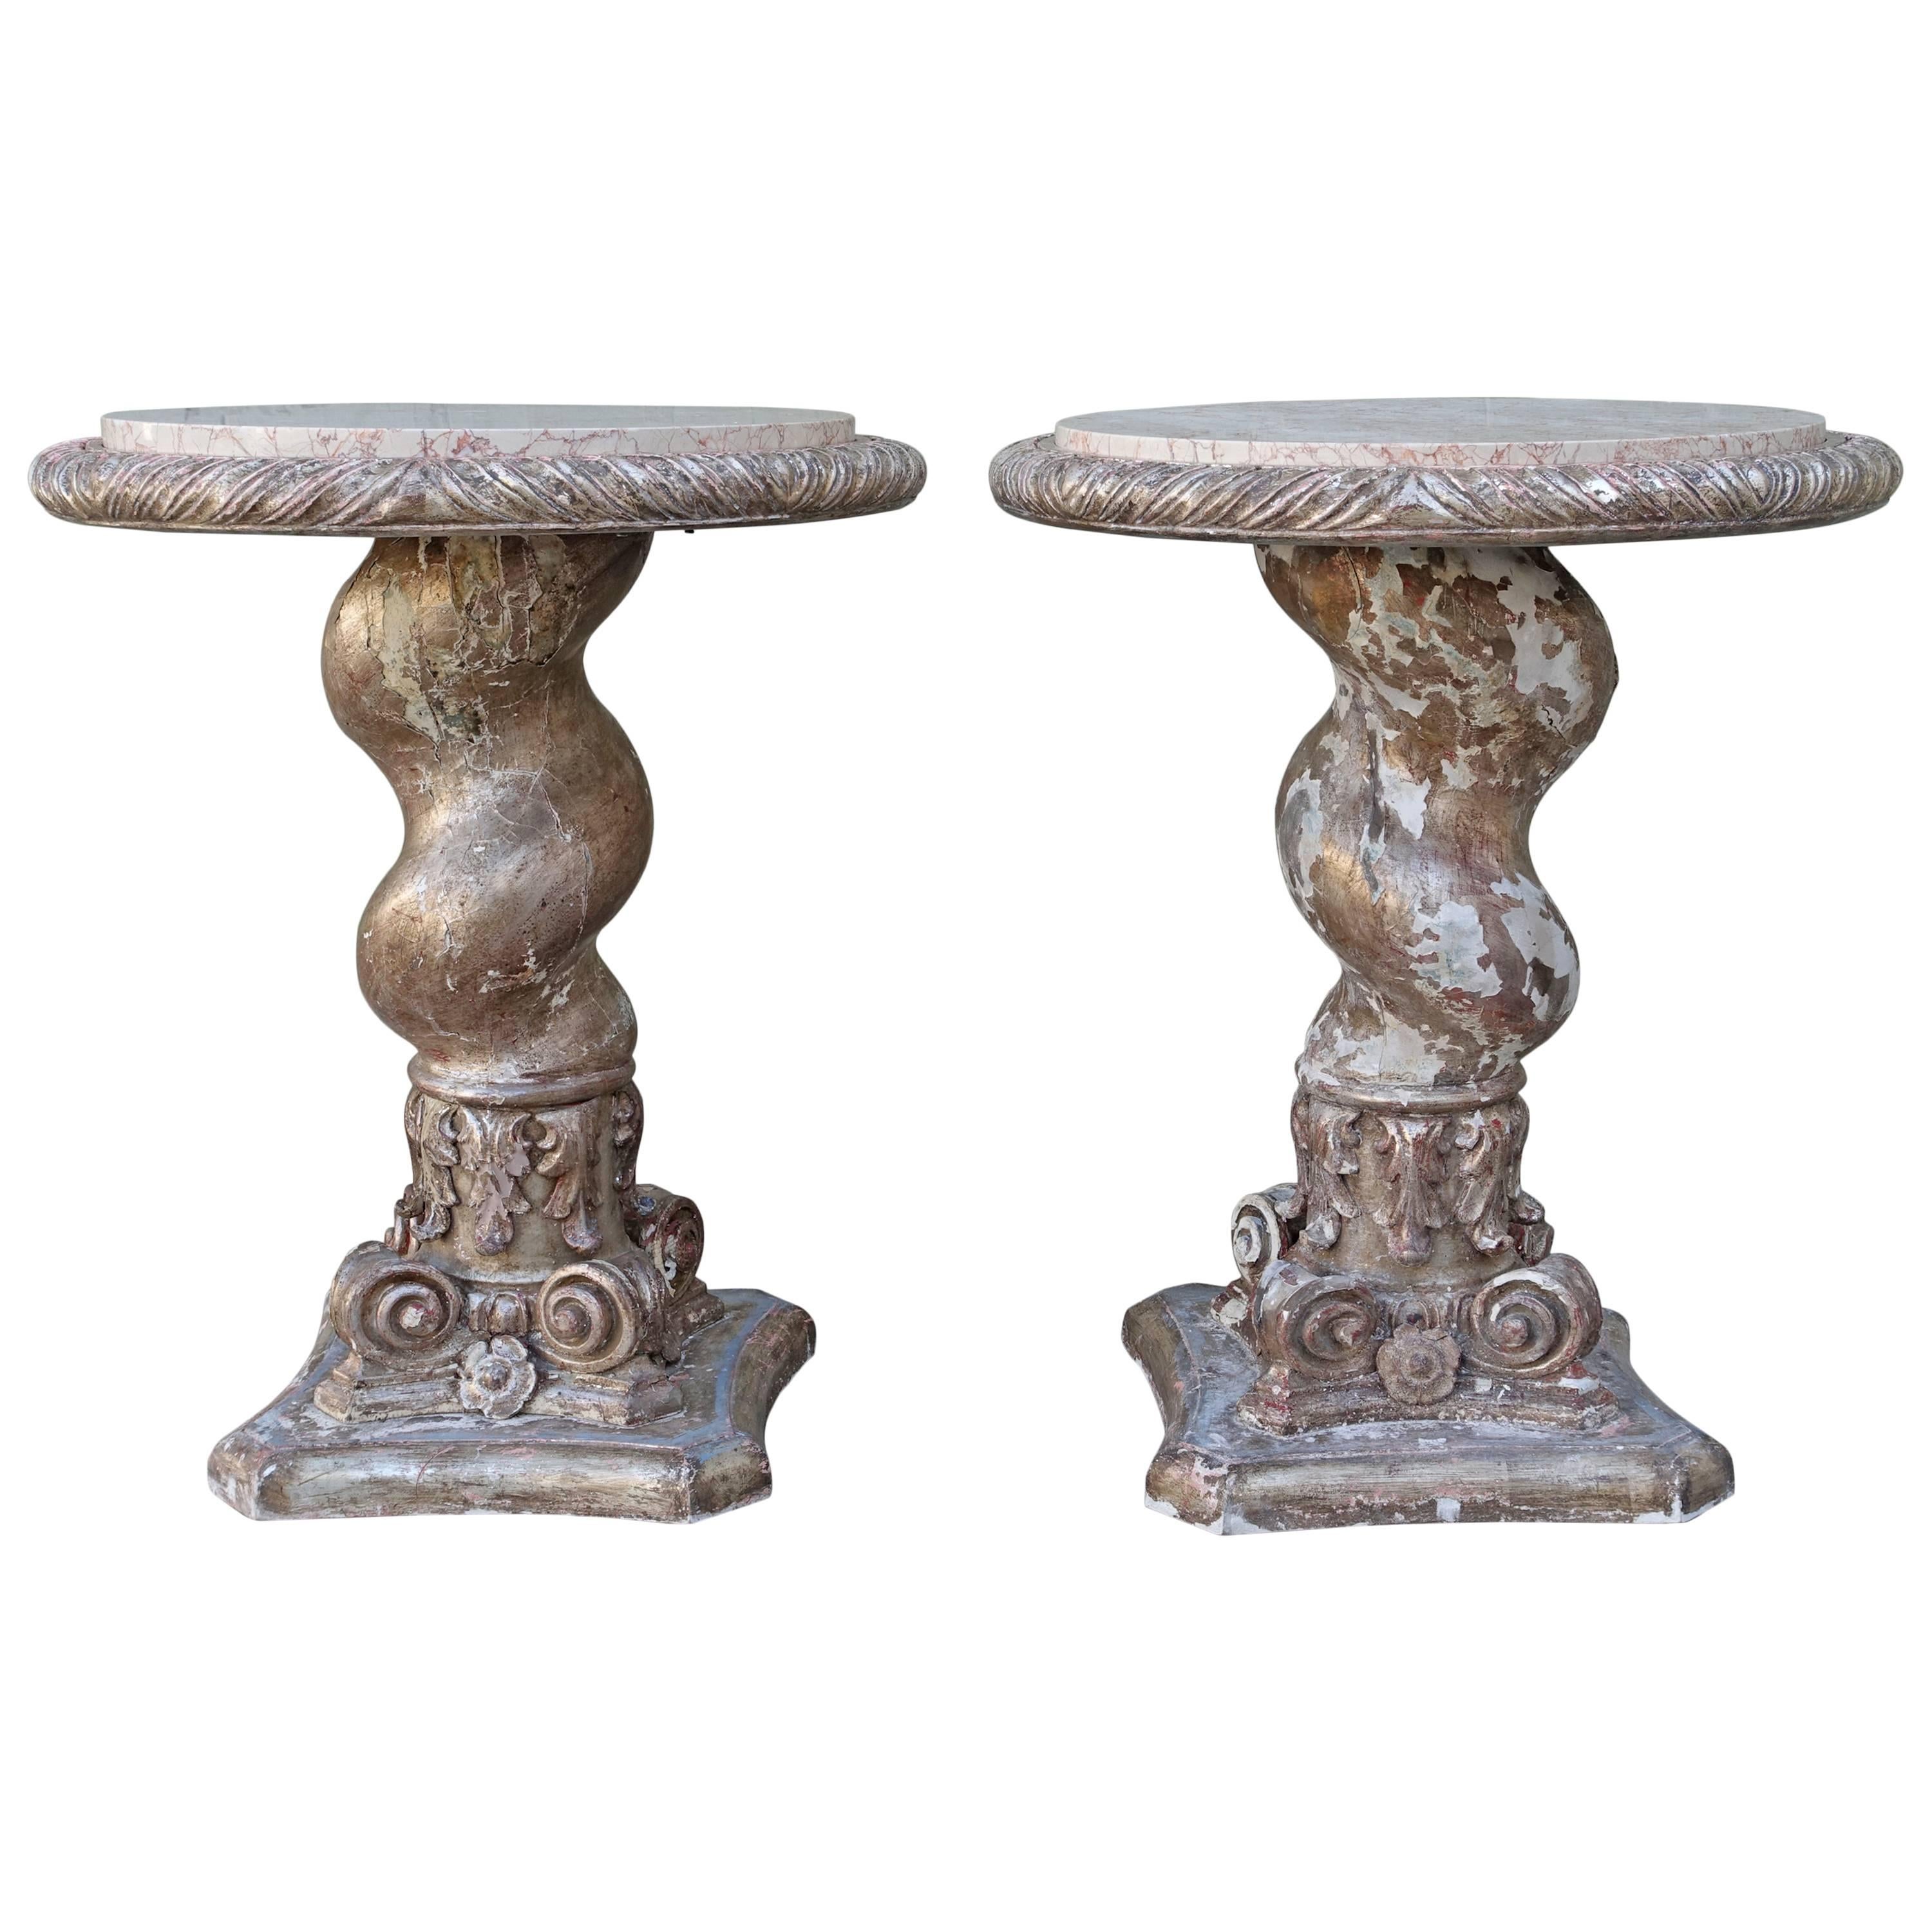 Pair of Italian Twisted Column Tables